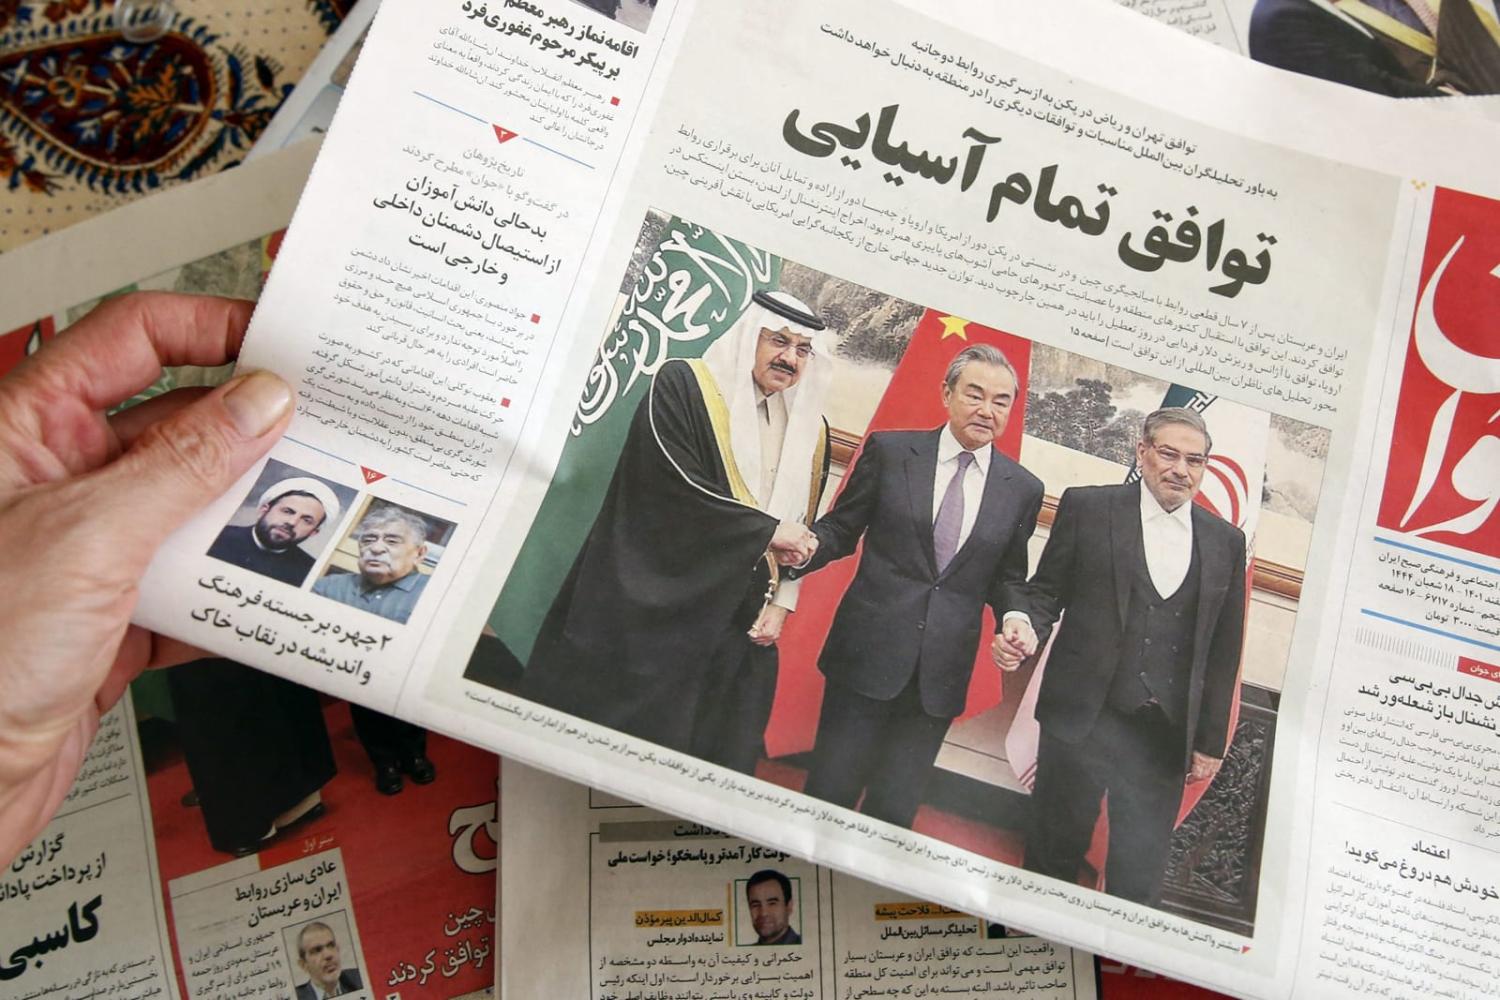 An Iranian newspaper reporting news of the China-brokered deal between Iran and Saudi Arabia to restore ties, signed in Beijing on 10 March (Atta Kenare/AFP via Getty Images)